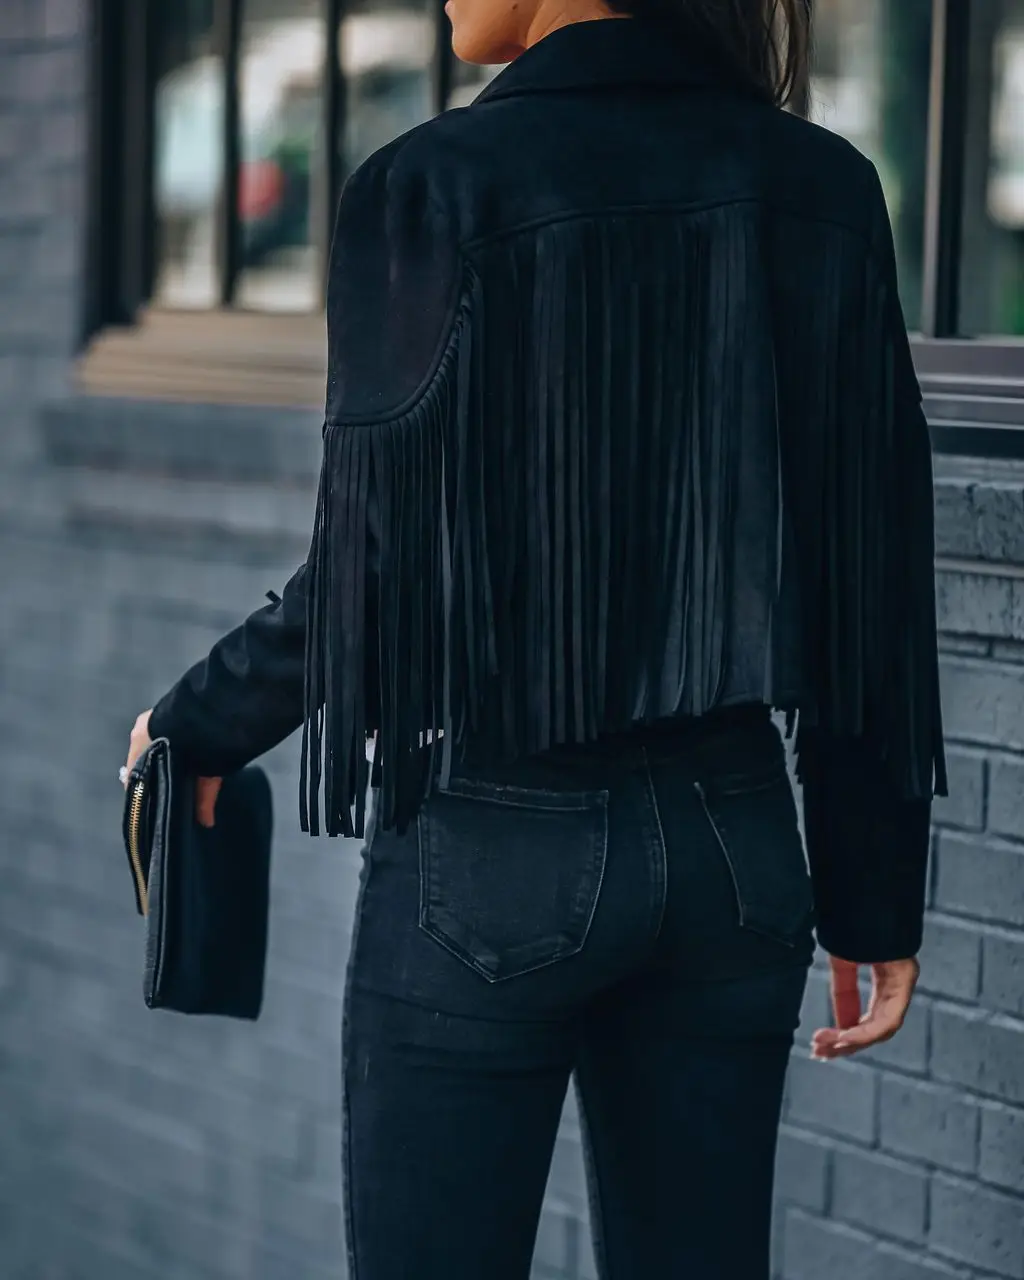 Women's Fringe Jacket Faux Suede Leather Jackets Fashion Tassel Moto Biker  Cropped Coats Cardigan 70s Hippie Clothes : : Clothing, Shoes &  Accessories